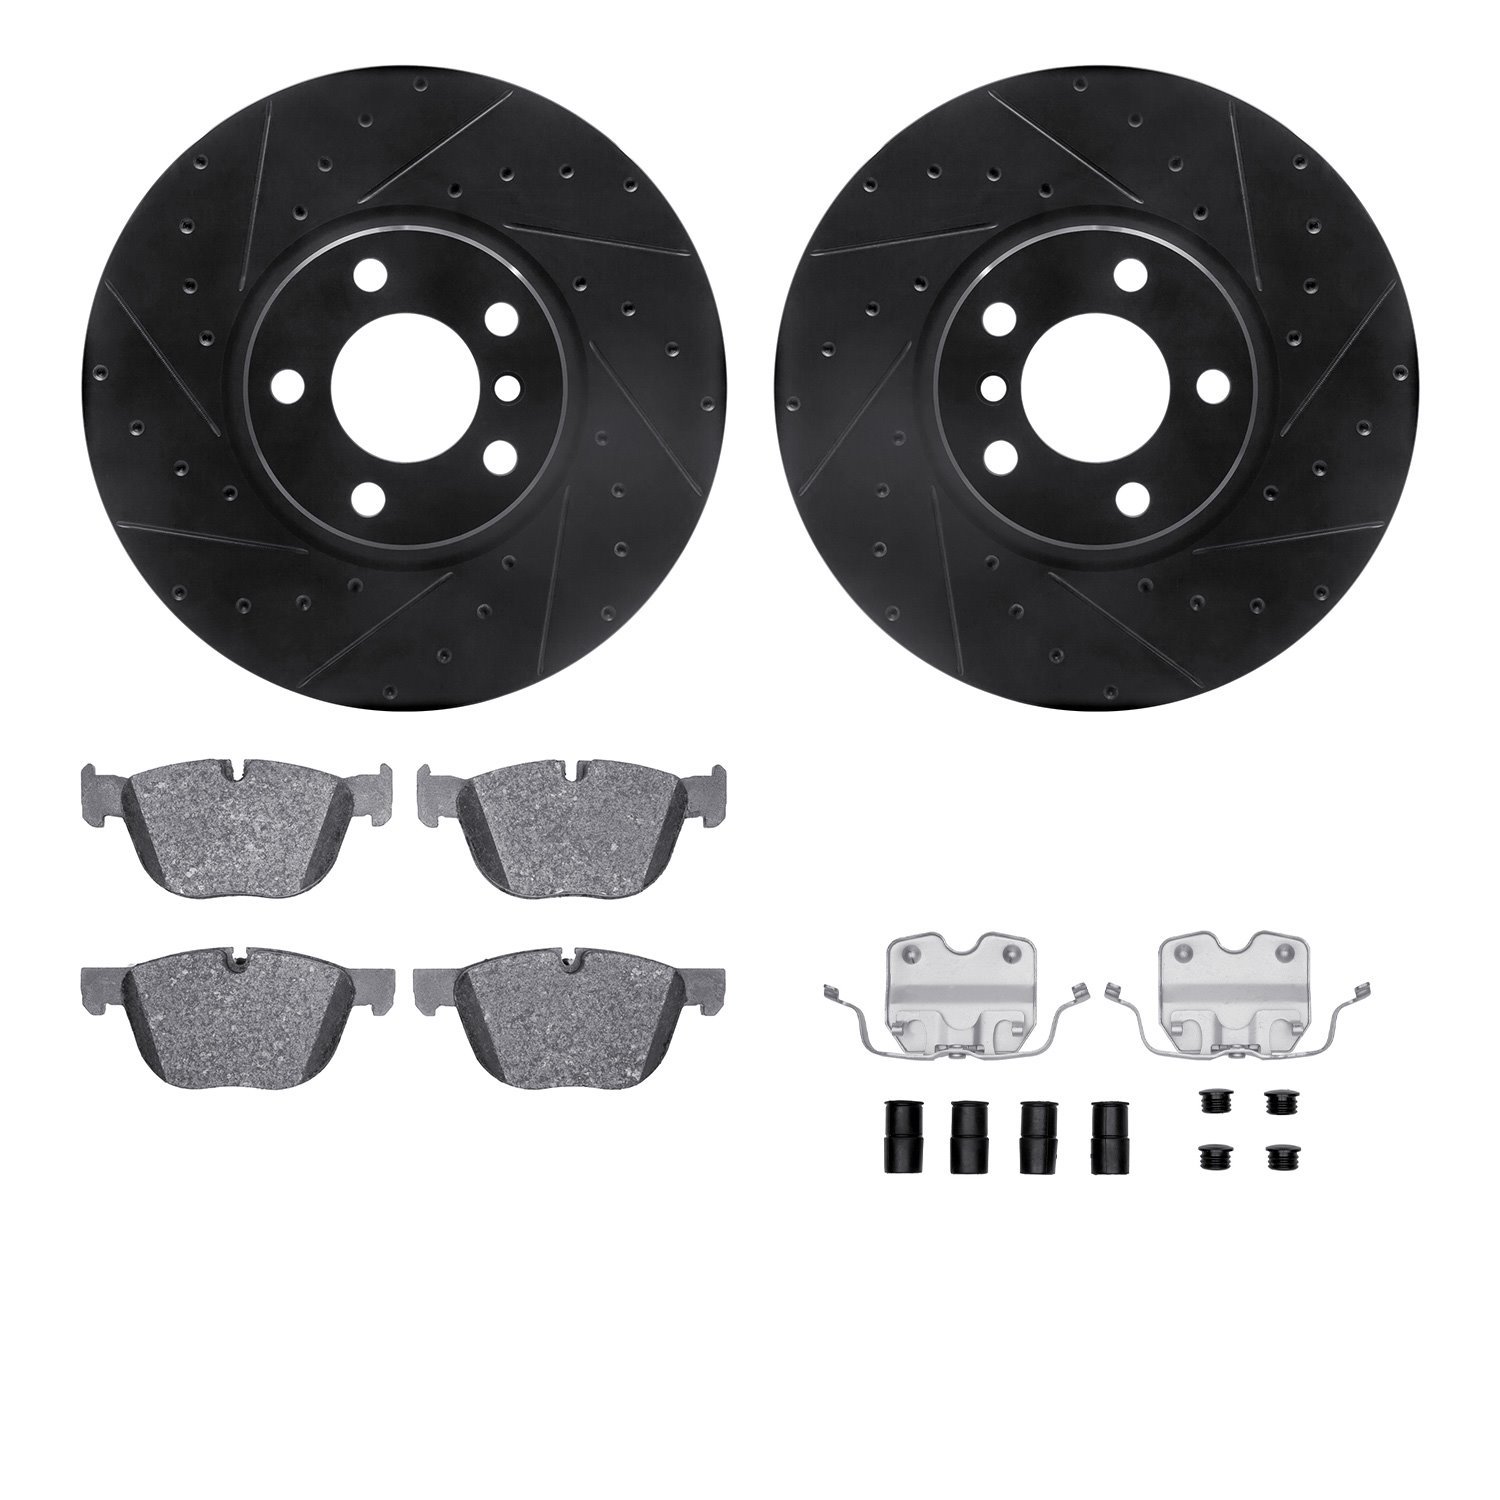 8312-31094 Dimpled/Slotted Brake Rotors with 3000-Series Ceramic Brake Pads Kit & Hardware [Black], 2016-2018 BMW, Position: Fro